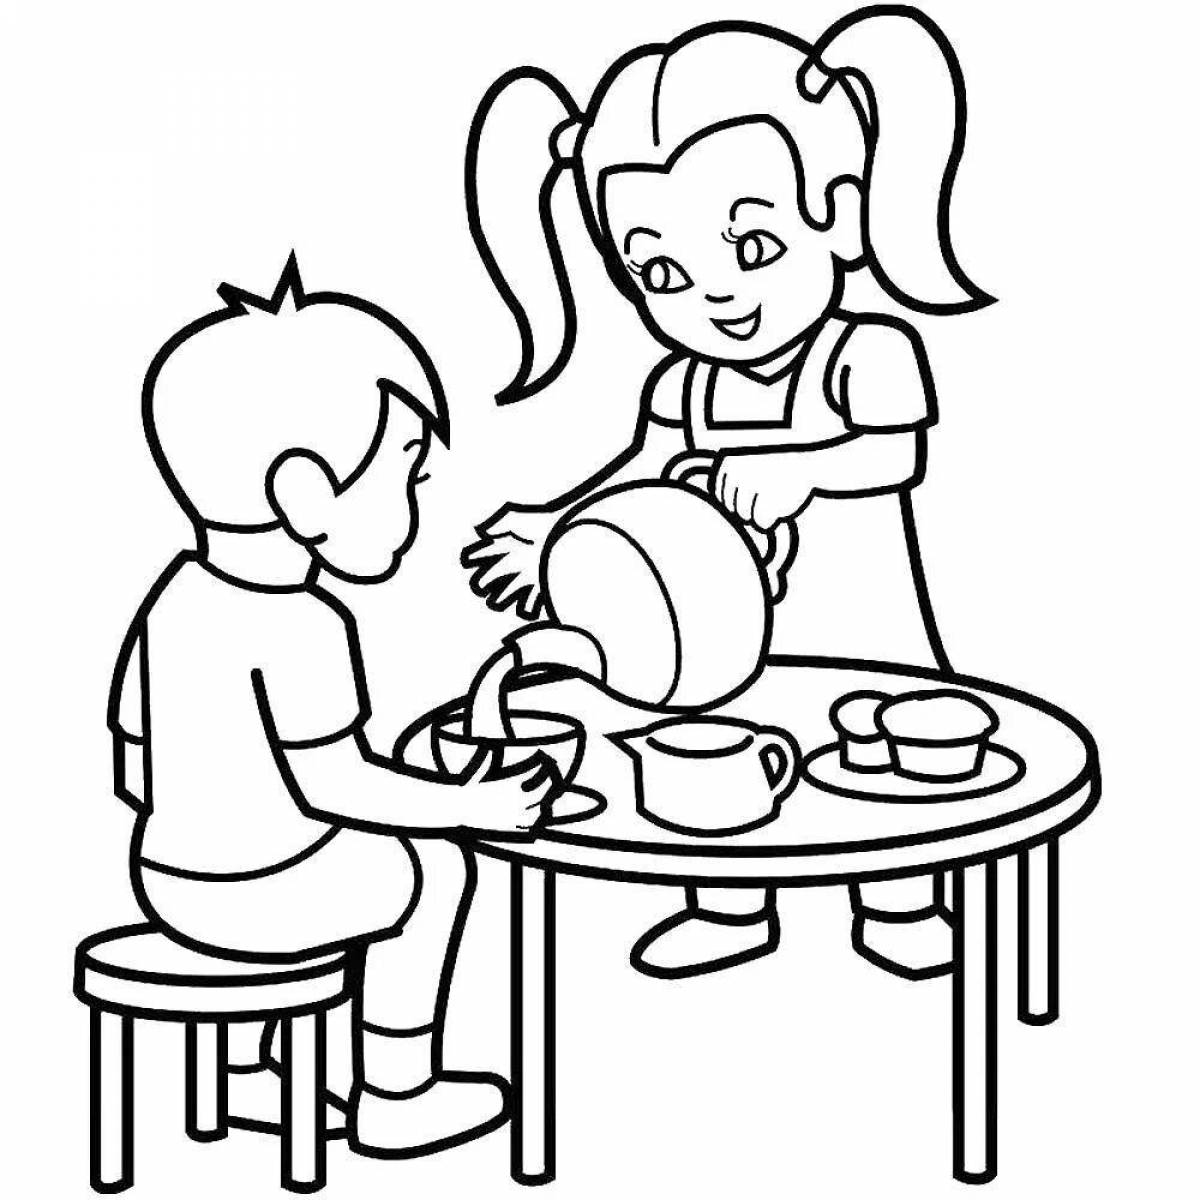 Coloring book for children rules of conduct in kindergarten